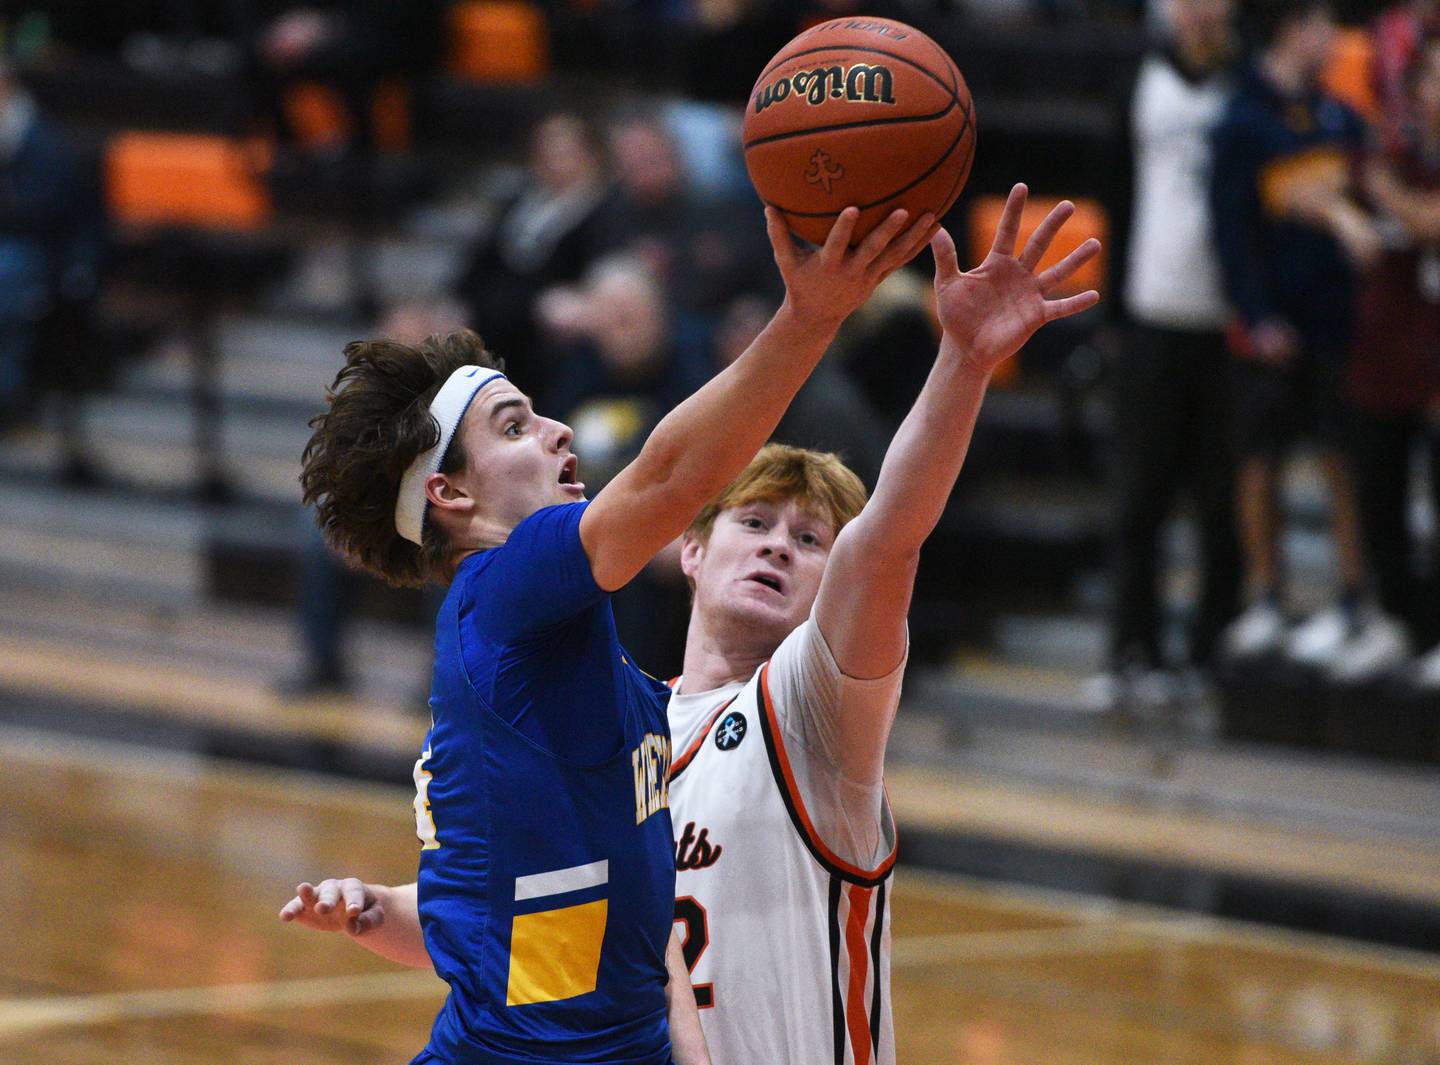 Wheaton North's Hudson Parker, left, takes a shot past St. Charles East's Brad Monkemeyer during Wednesday’s boys basketball game in St. Charles.